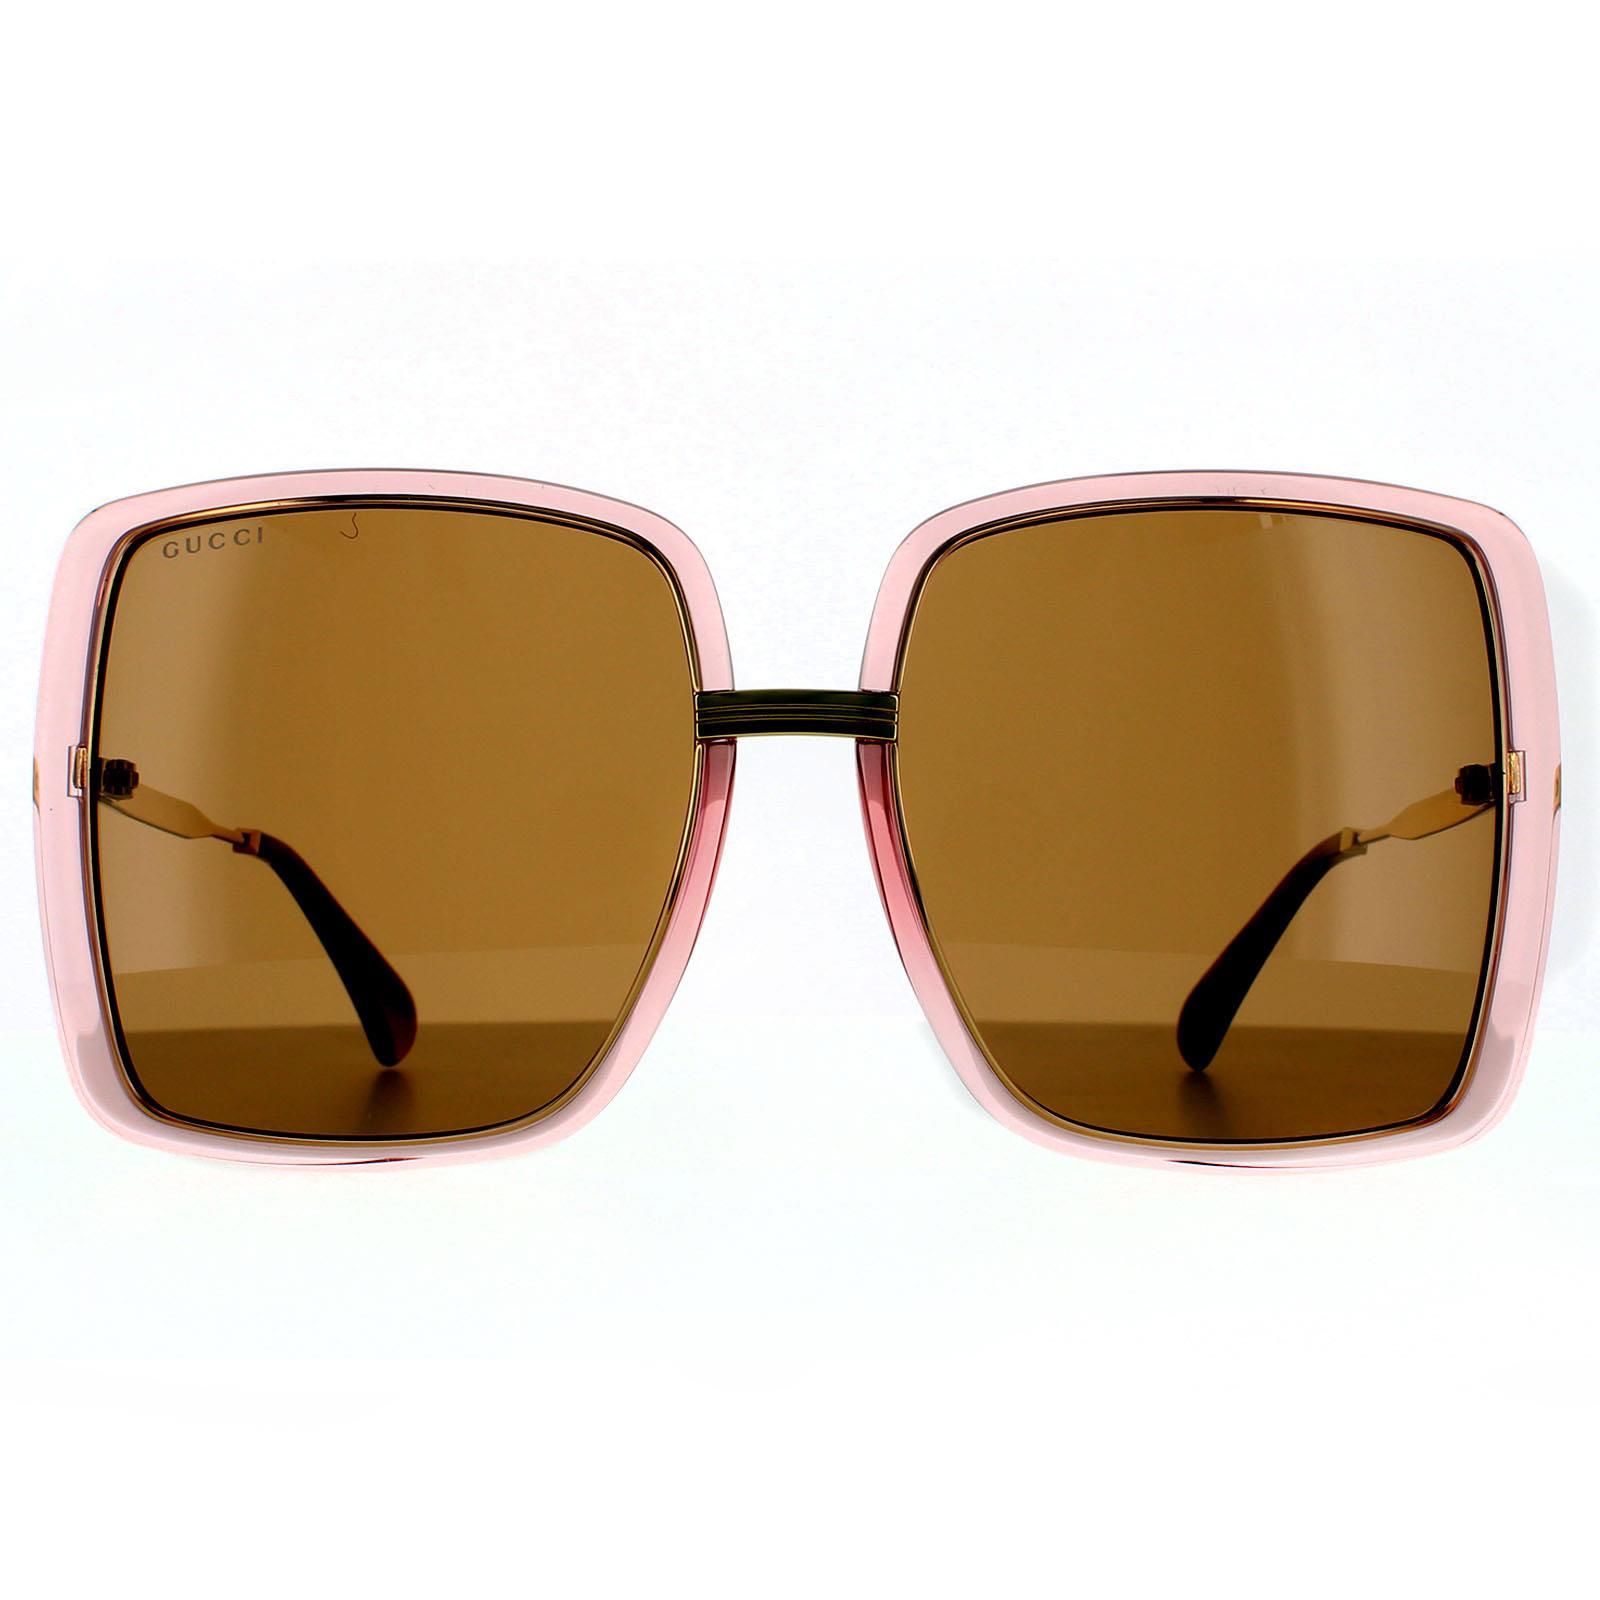 Gucci Square Womens Pink Crystal and Gold  Brown Sunglasses Gucci have super oversized square lenses with plastic rims and contrasting slim metal temples and bridge. Stripes are engraved into the  metal, as well as the Gucci logo on the temples.